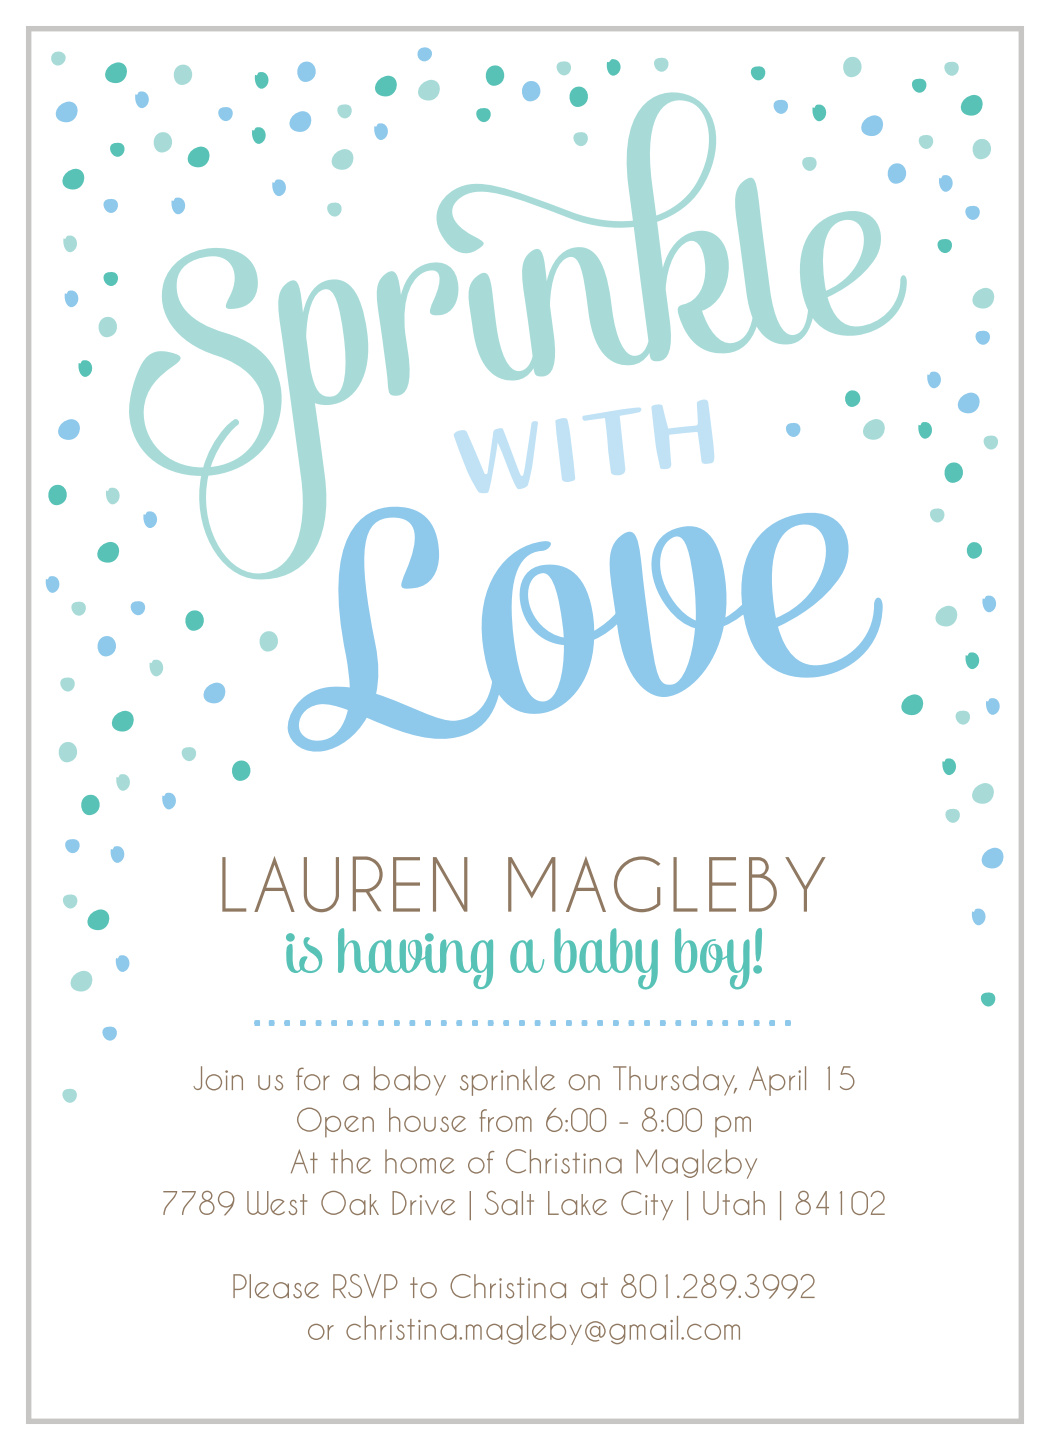 Sprinkled With Love Baby Shower Invitations 7